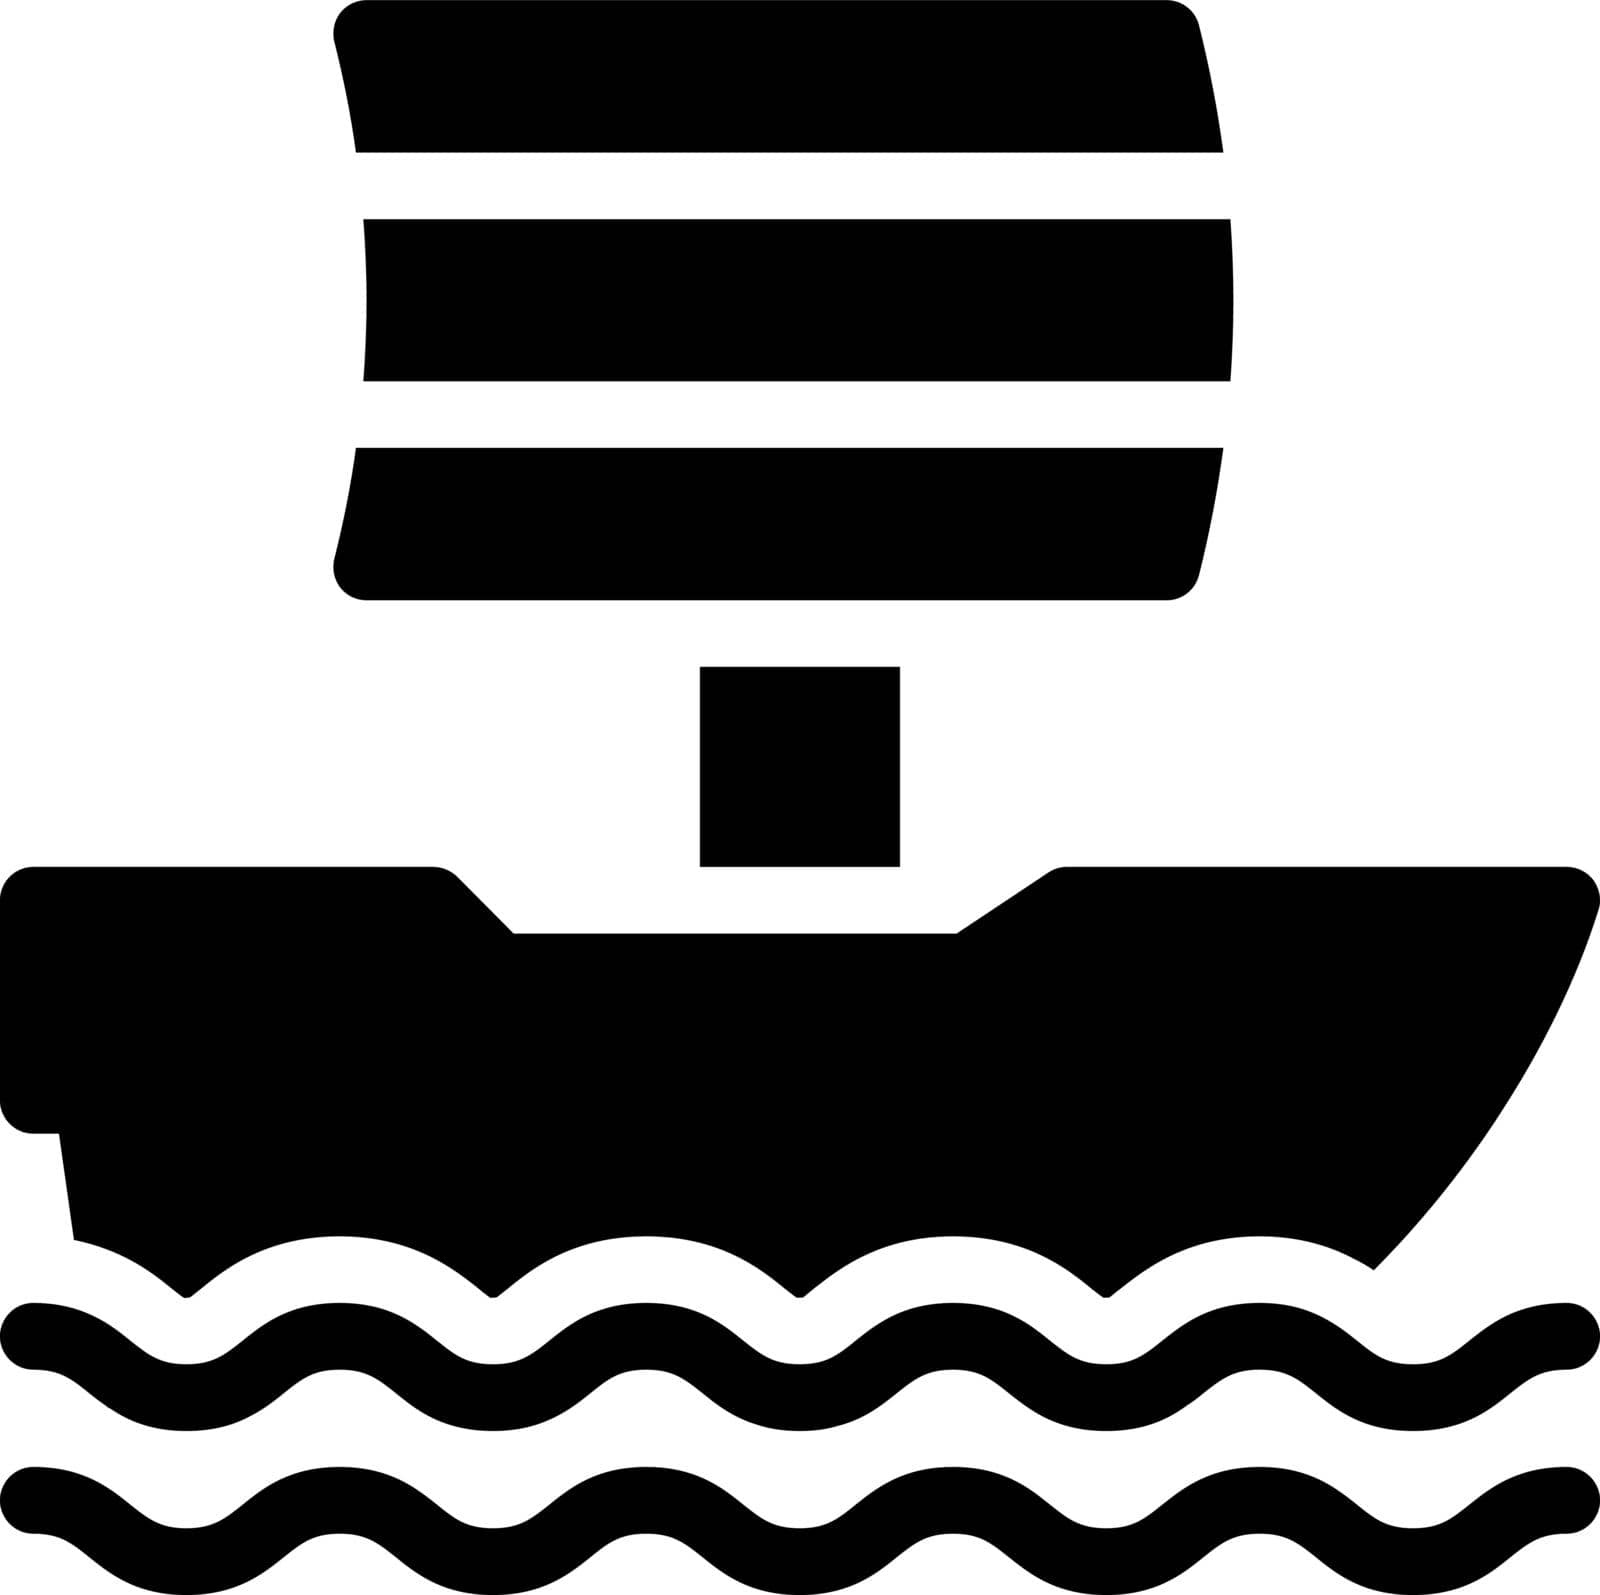 boat vector illustration on a transparent background.Premium quality symbols.Glyph icons for concept and graphic design.